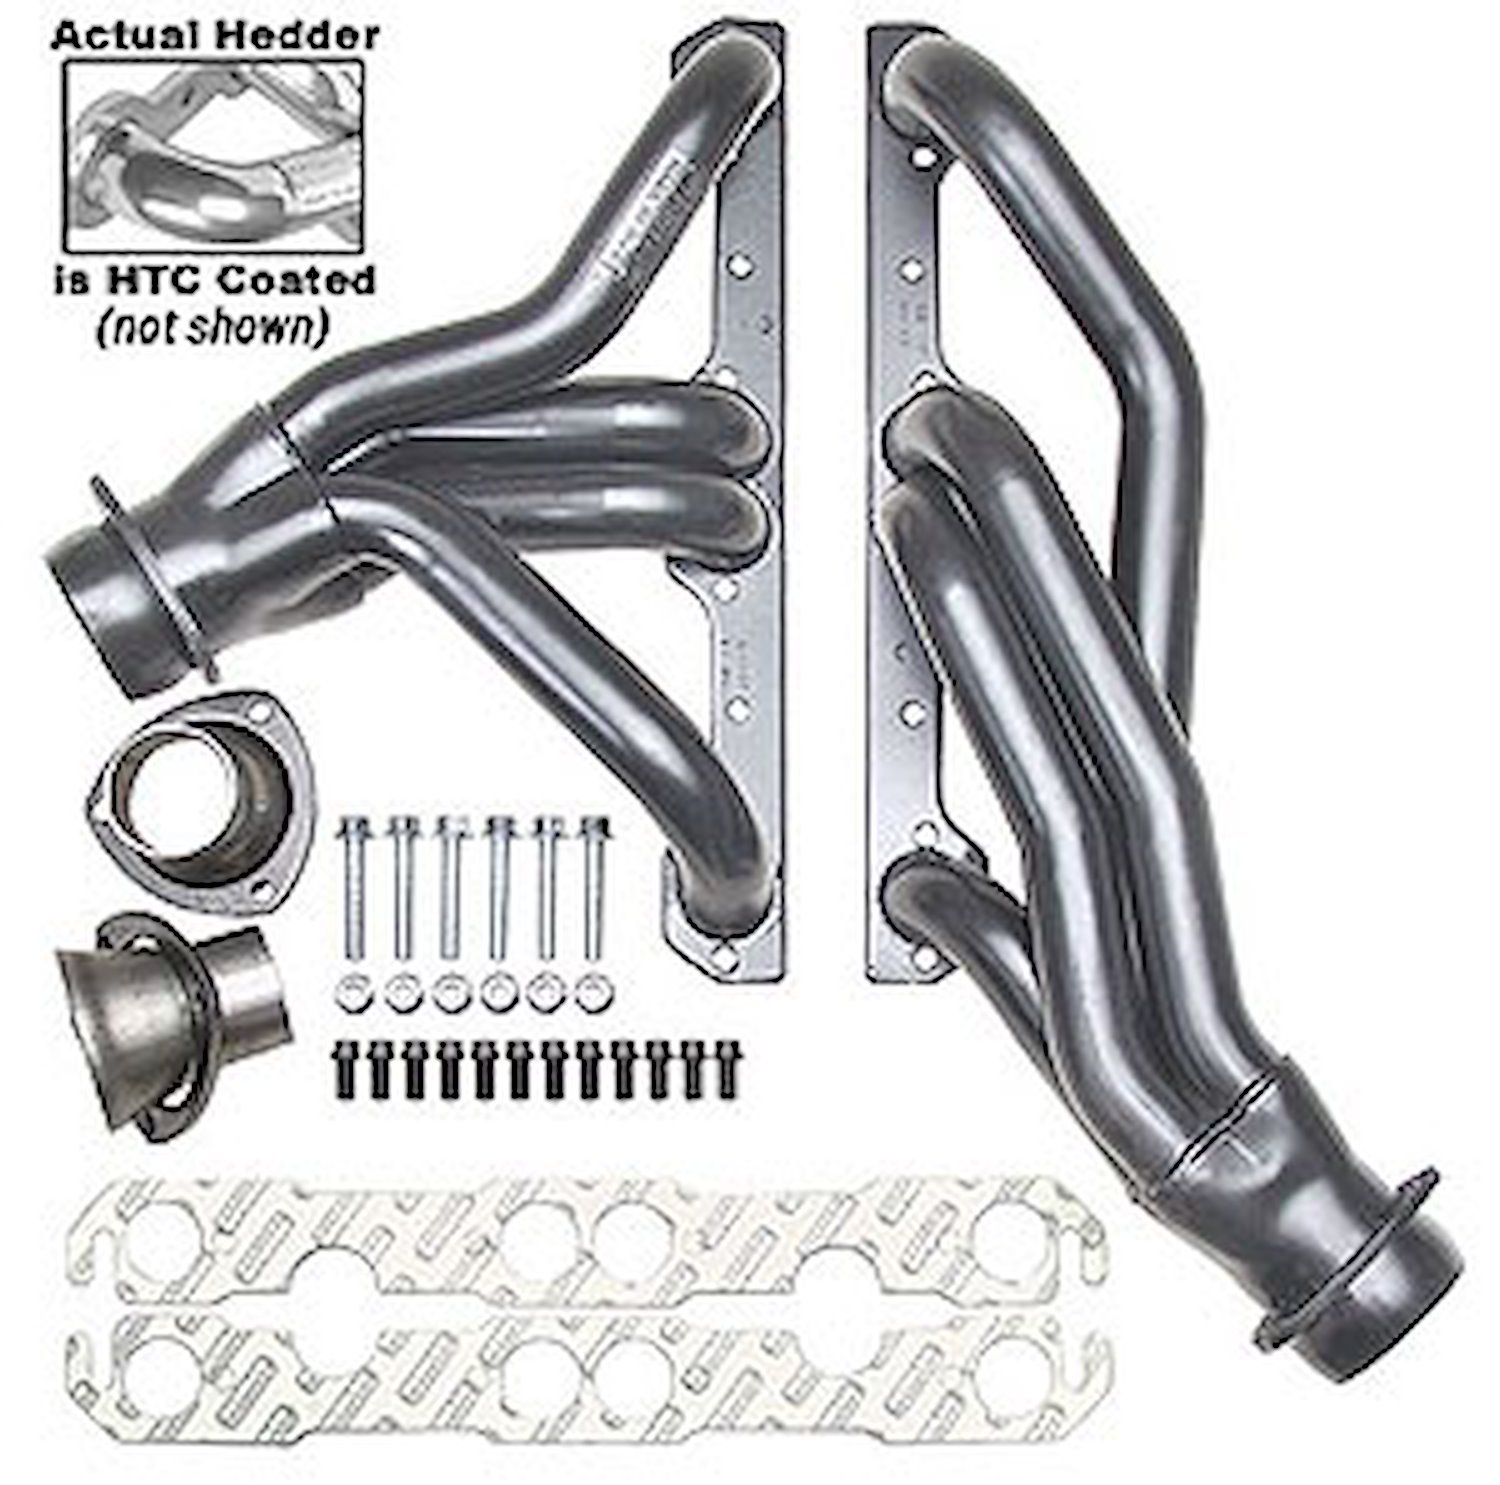 Standard-Duty Uncoated Shorty Headers 1968-87 Camaro, Chevelle,